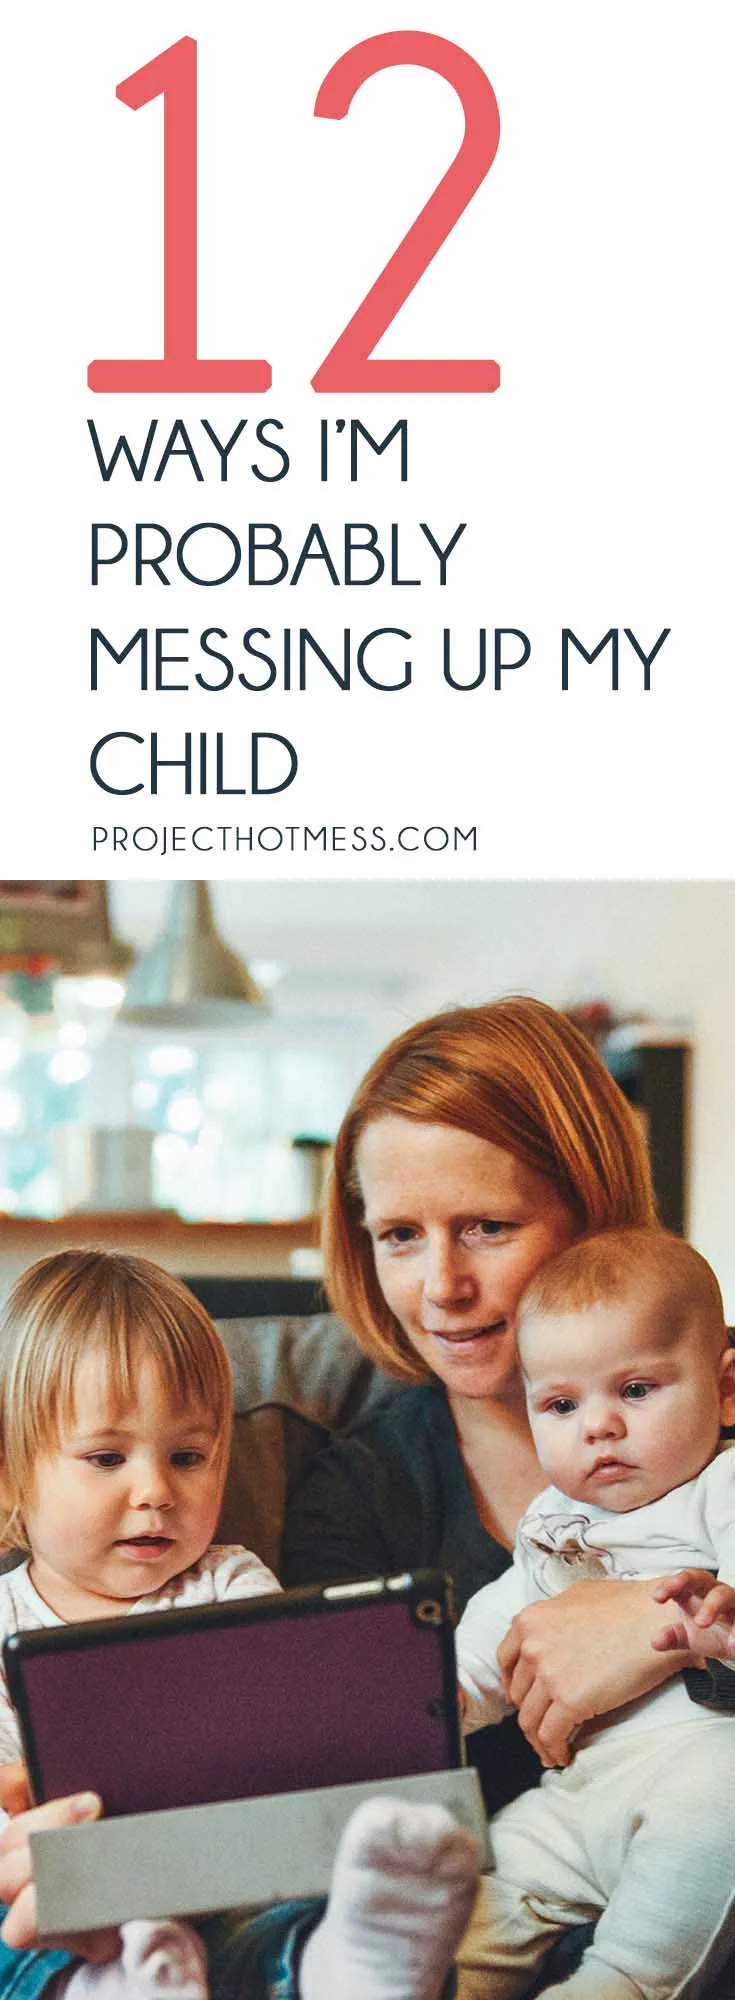 Parenting is hard. I literally stay awake at night thinking I'm probably messing up my child. What some say is right others say is wrong. It's a tough job! There's probably a million ways to mess up a child, these are the ones I stress about. Parenting | Parenting Advice | Mom Life | Parenting Goals | Parenting Ideas | Parenting Tips | Parenting Types | Parenting Hacks | Positive Parenting | Parenthood | Motherhood | Surviving Motherhood